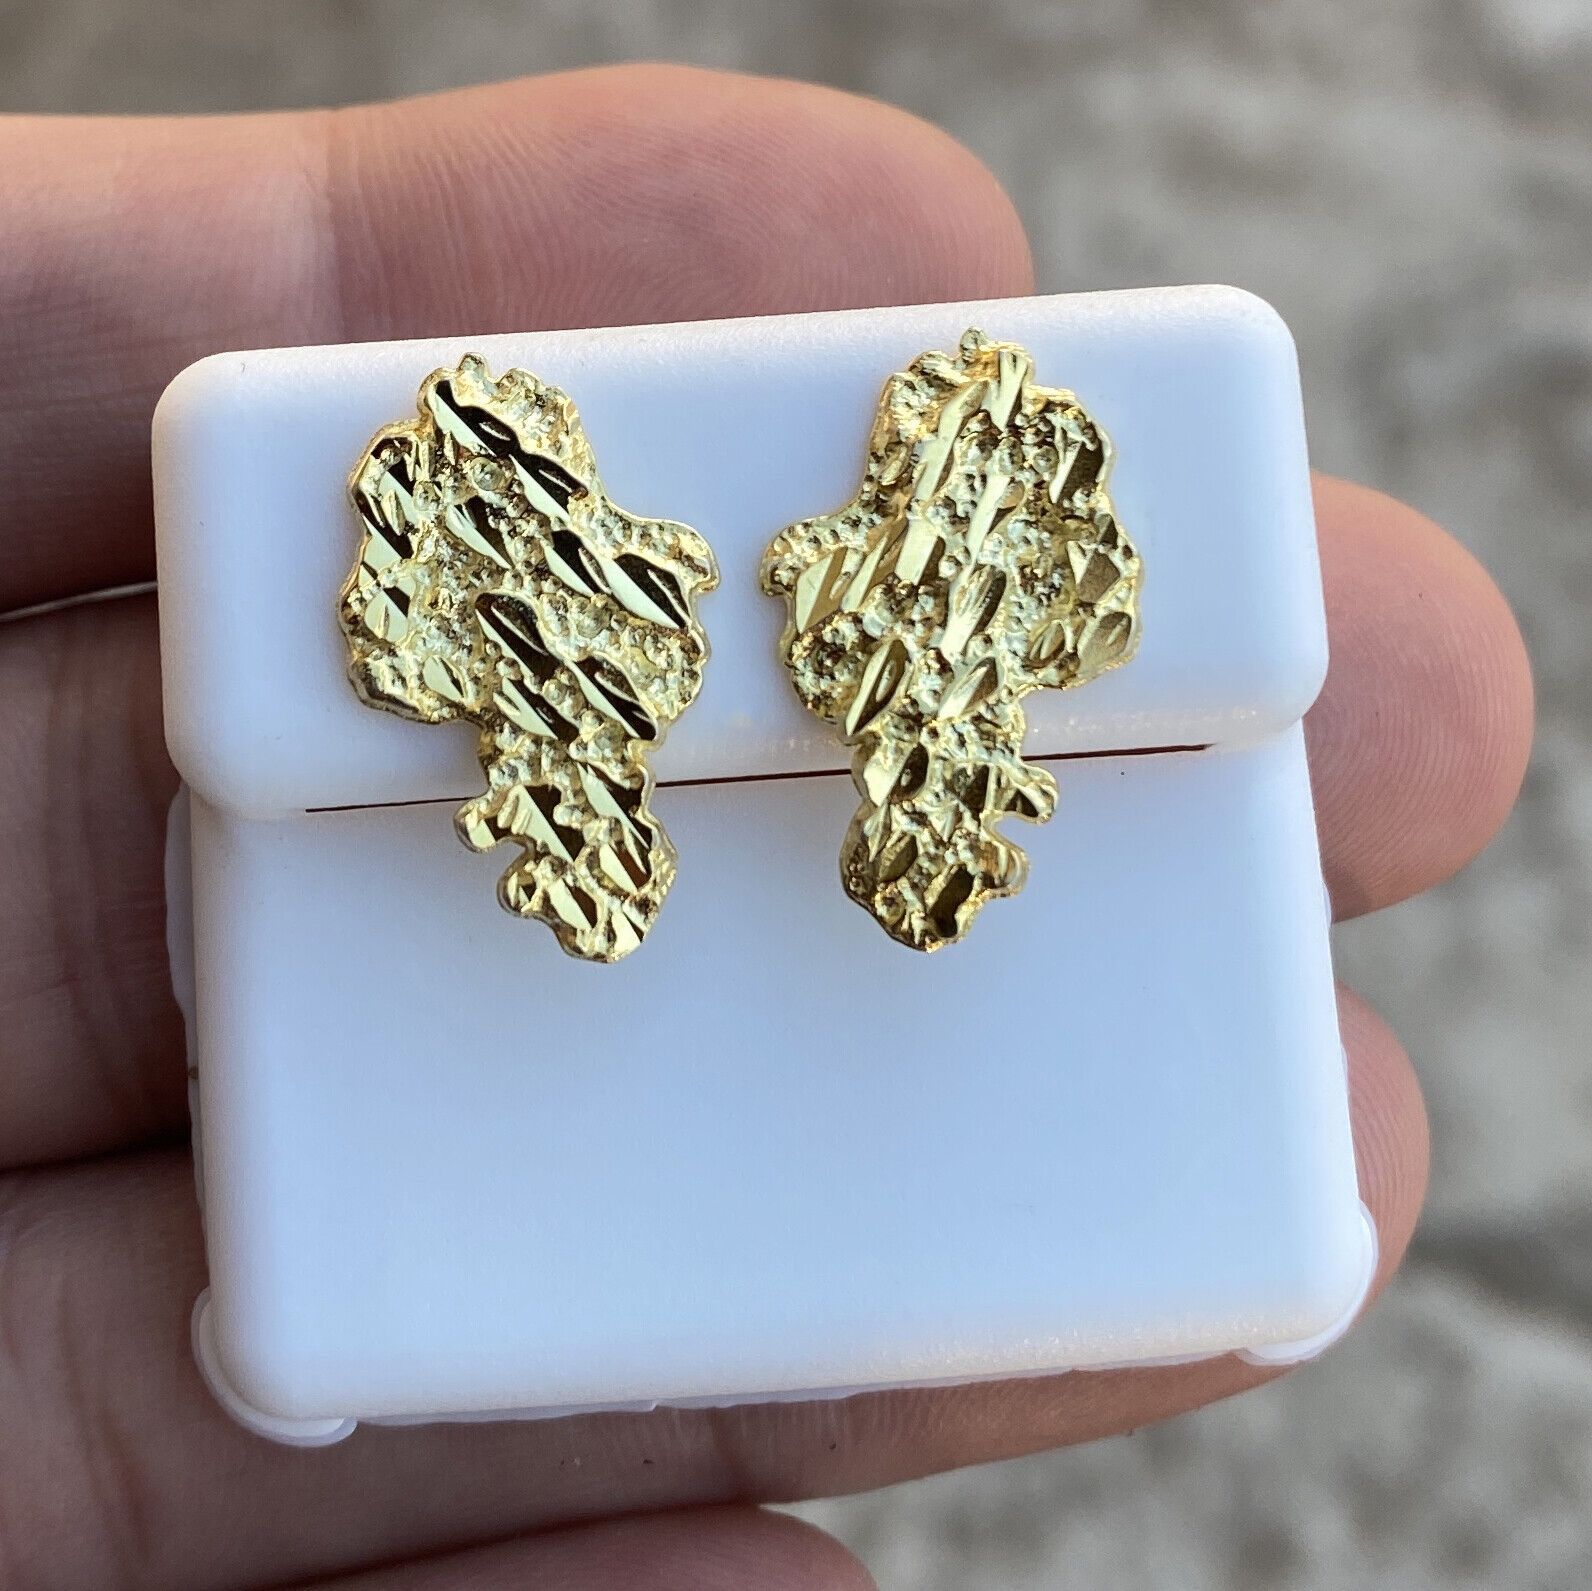 14k Gold Plated Nugget Earrings Real 925 Sterling Silver Diamond Cut Screw Back 20MM